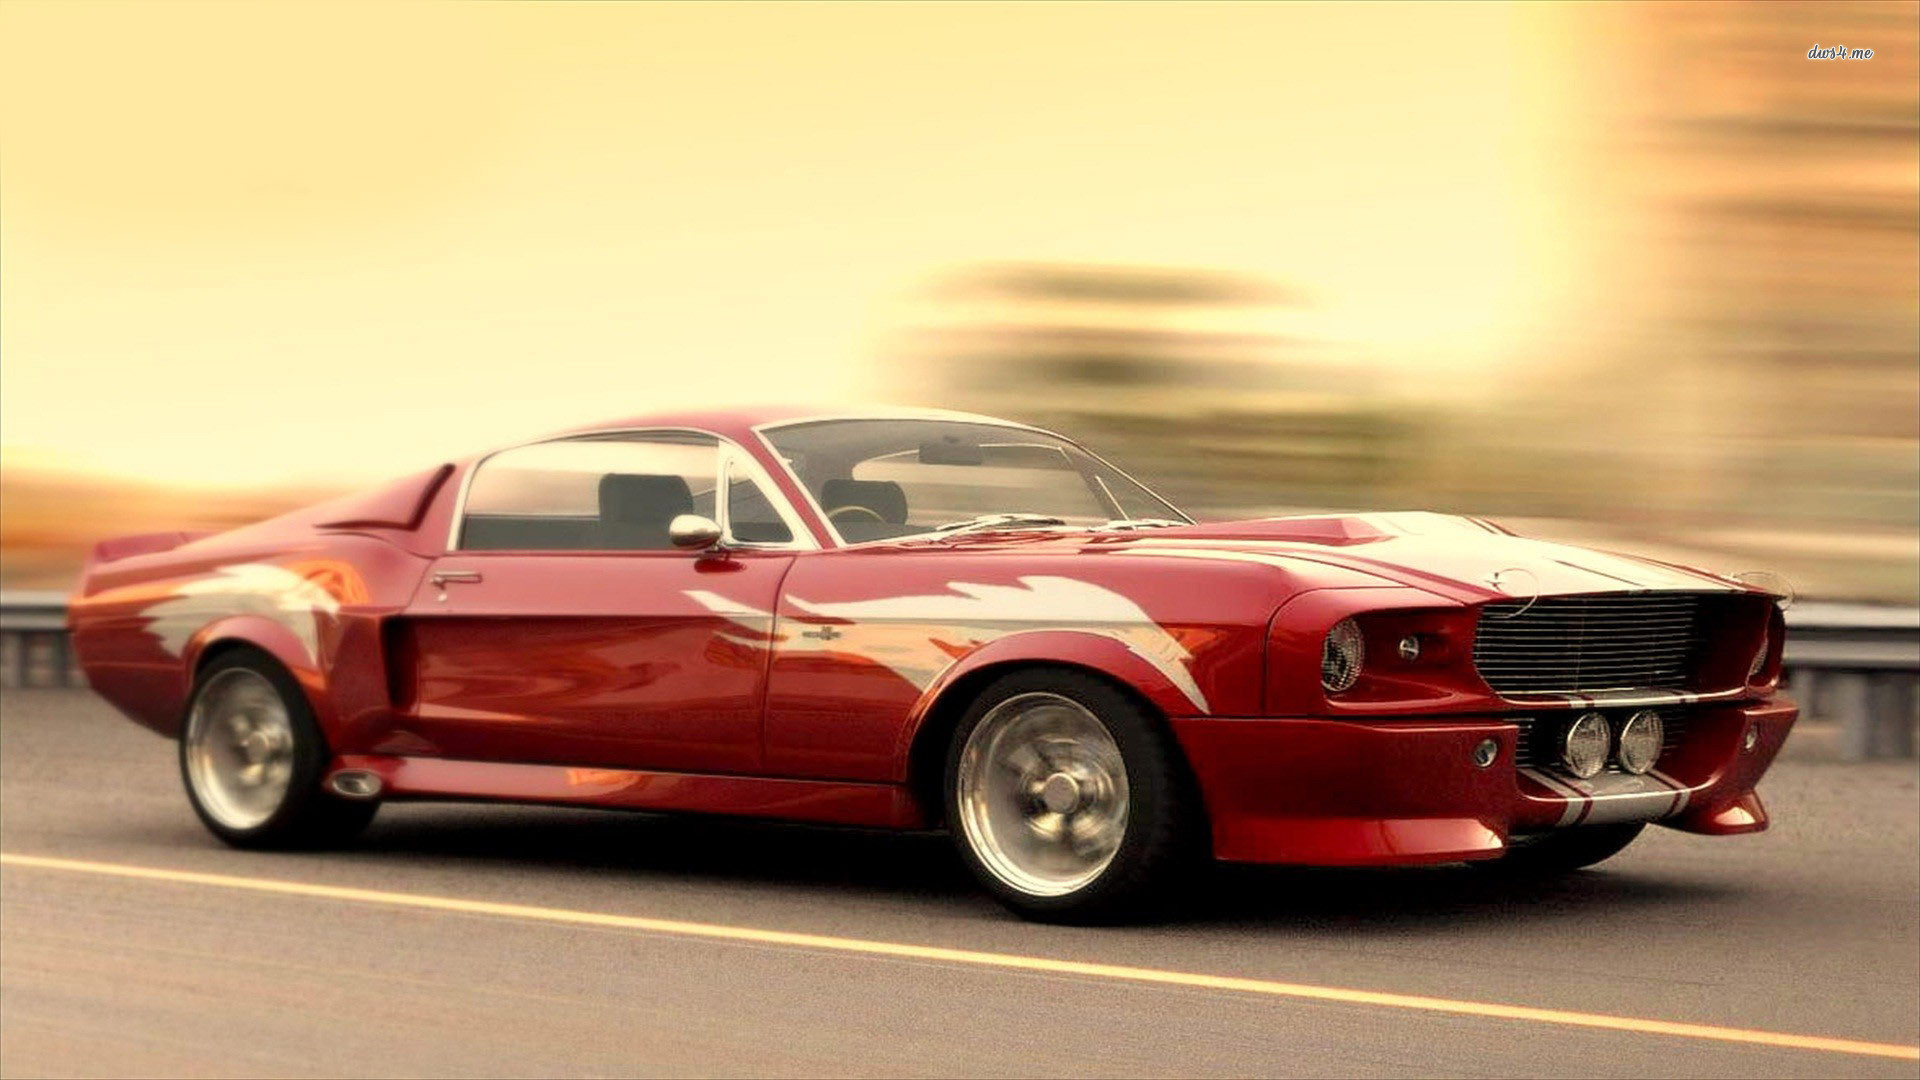 1920x1080 ... Ford Mustang Shelby GT 500 wallpaper  ...